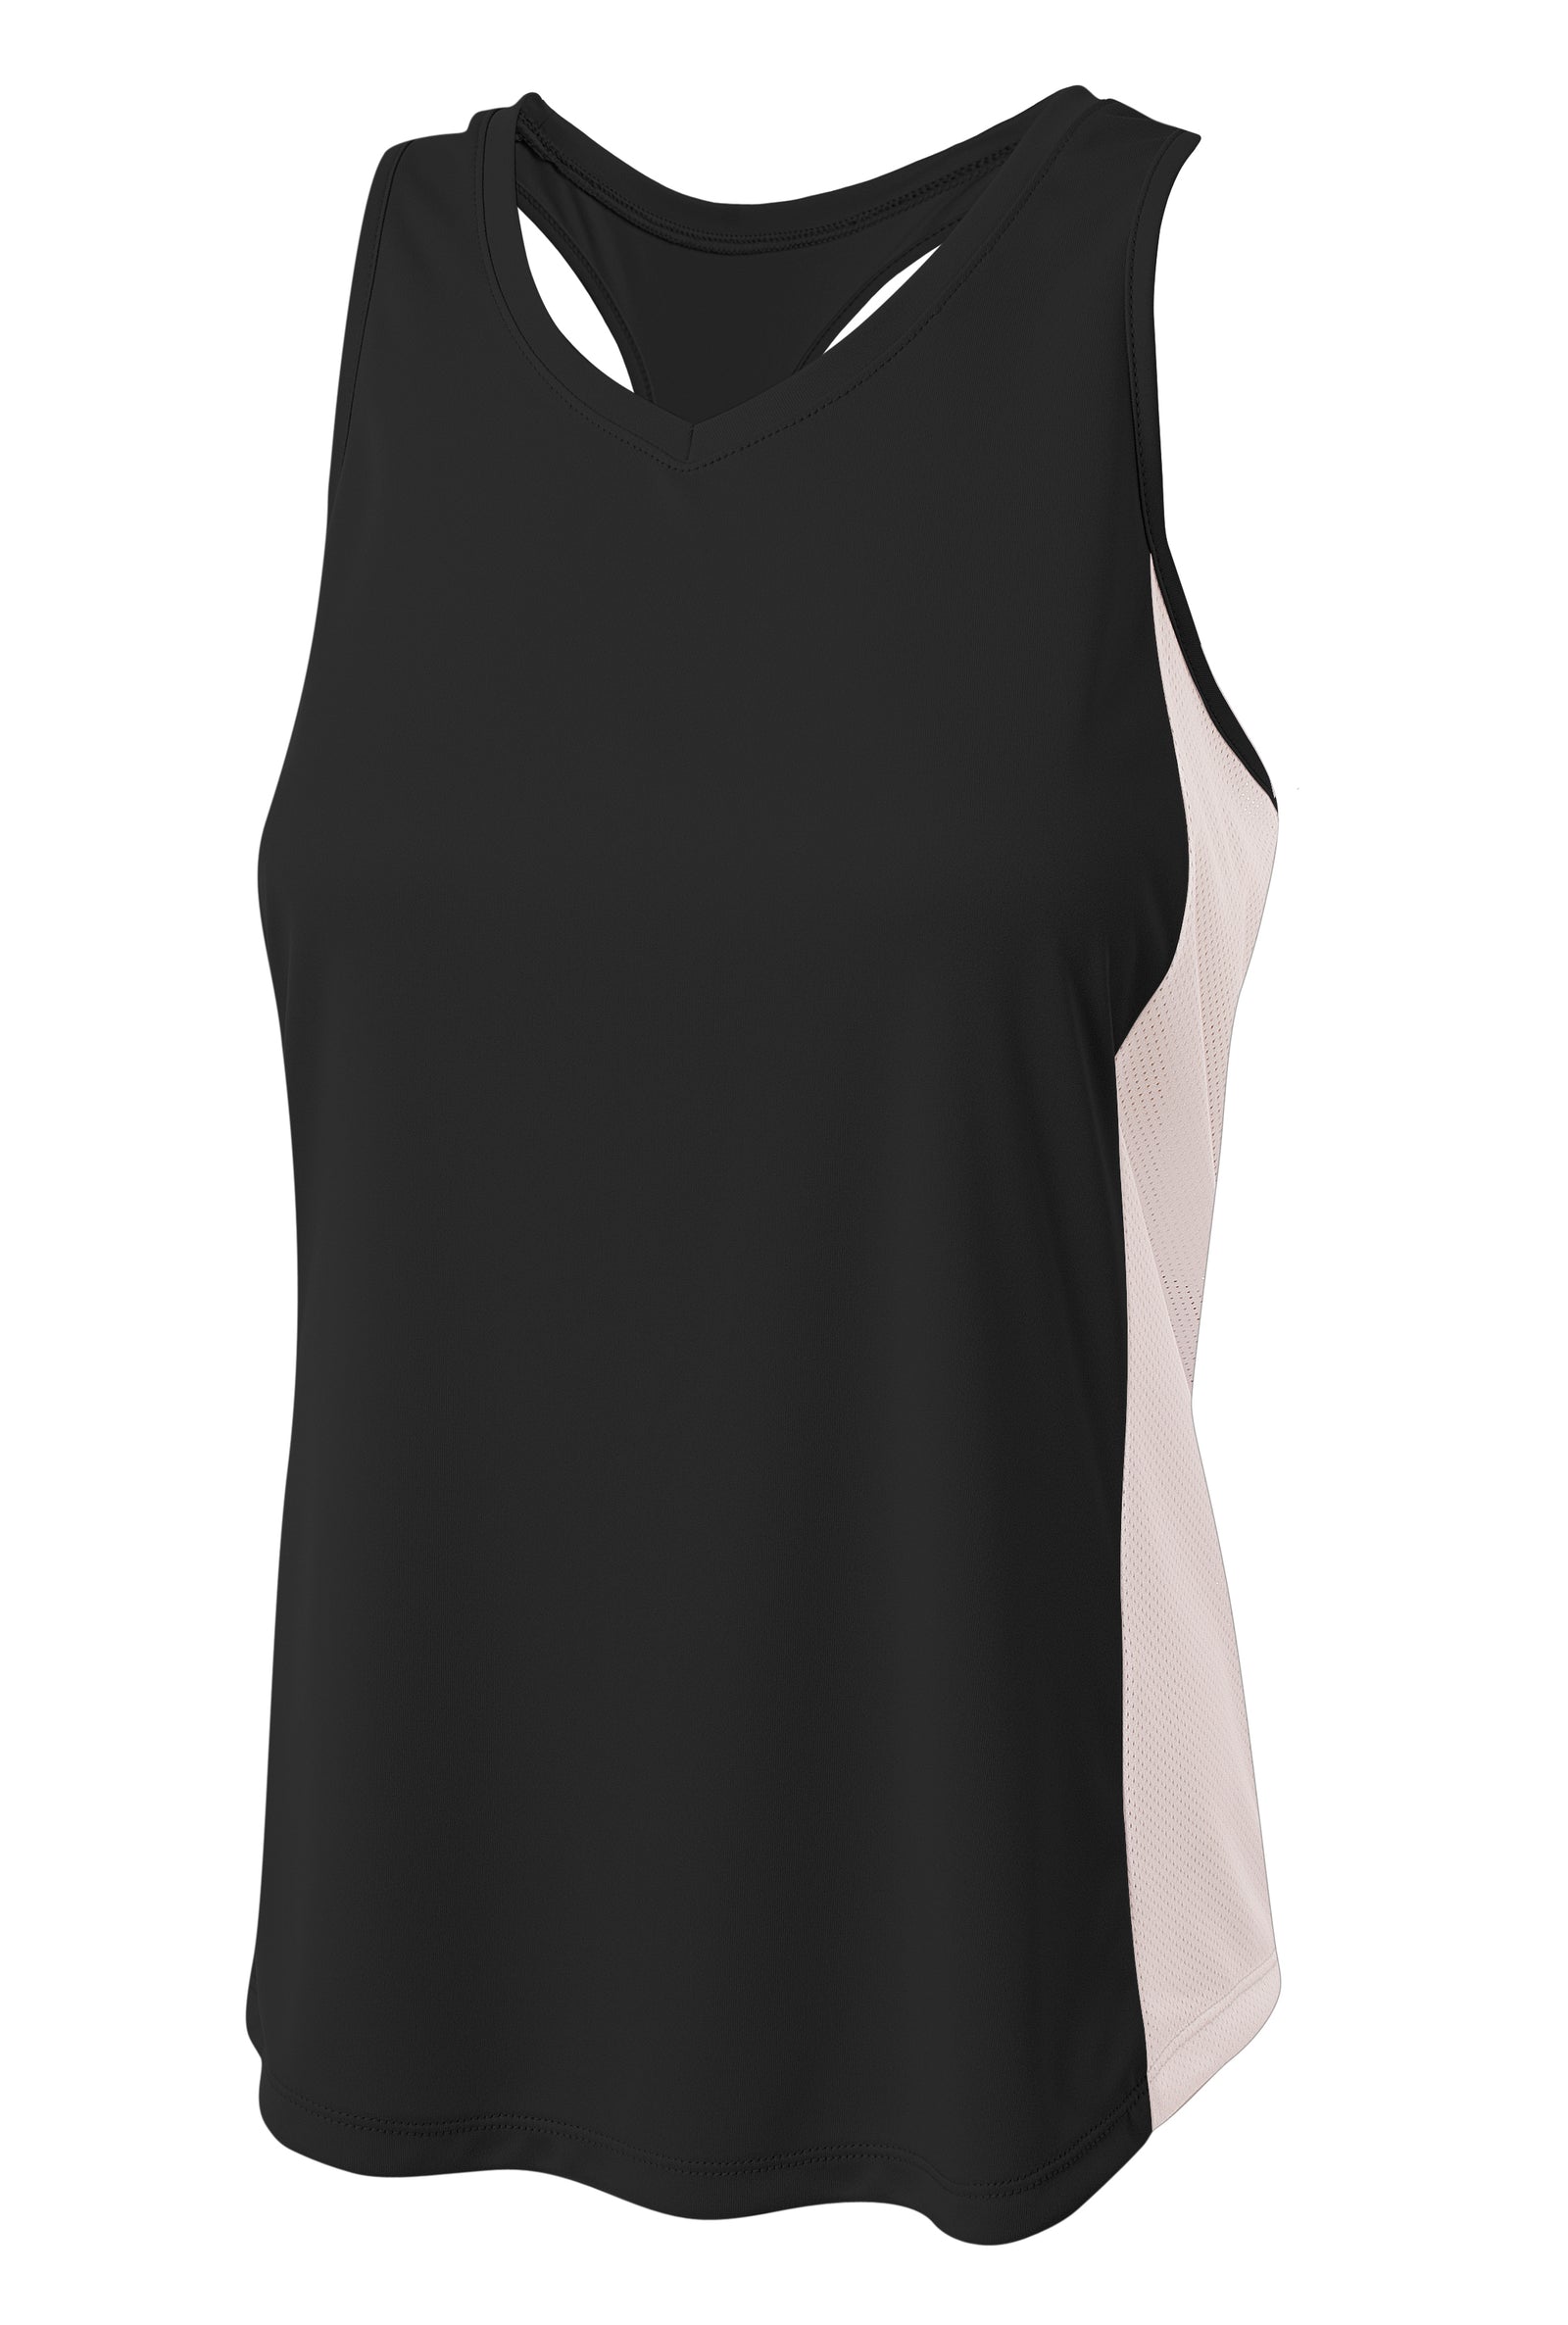 Black/white A4 A4 Pacer Singlet With Racerback